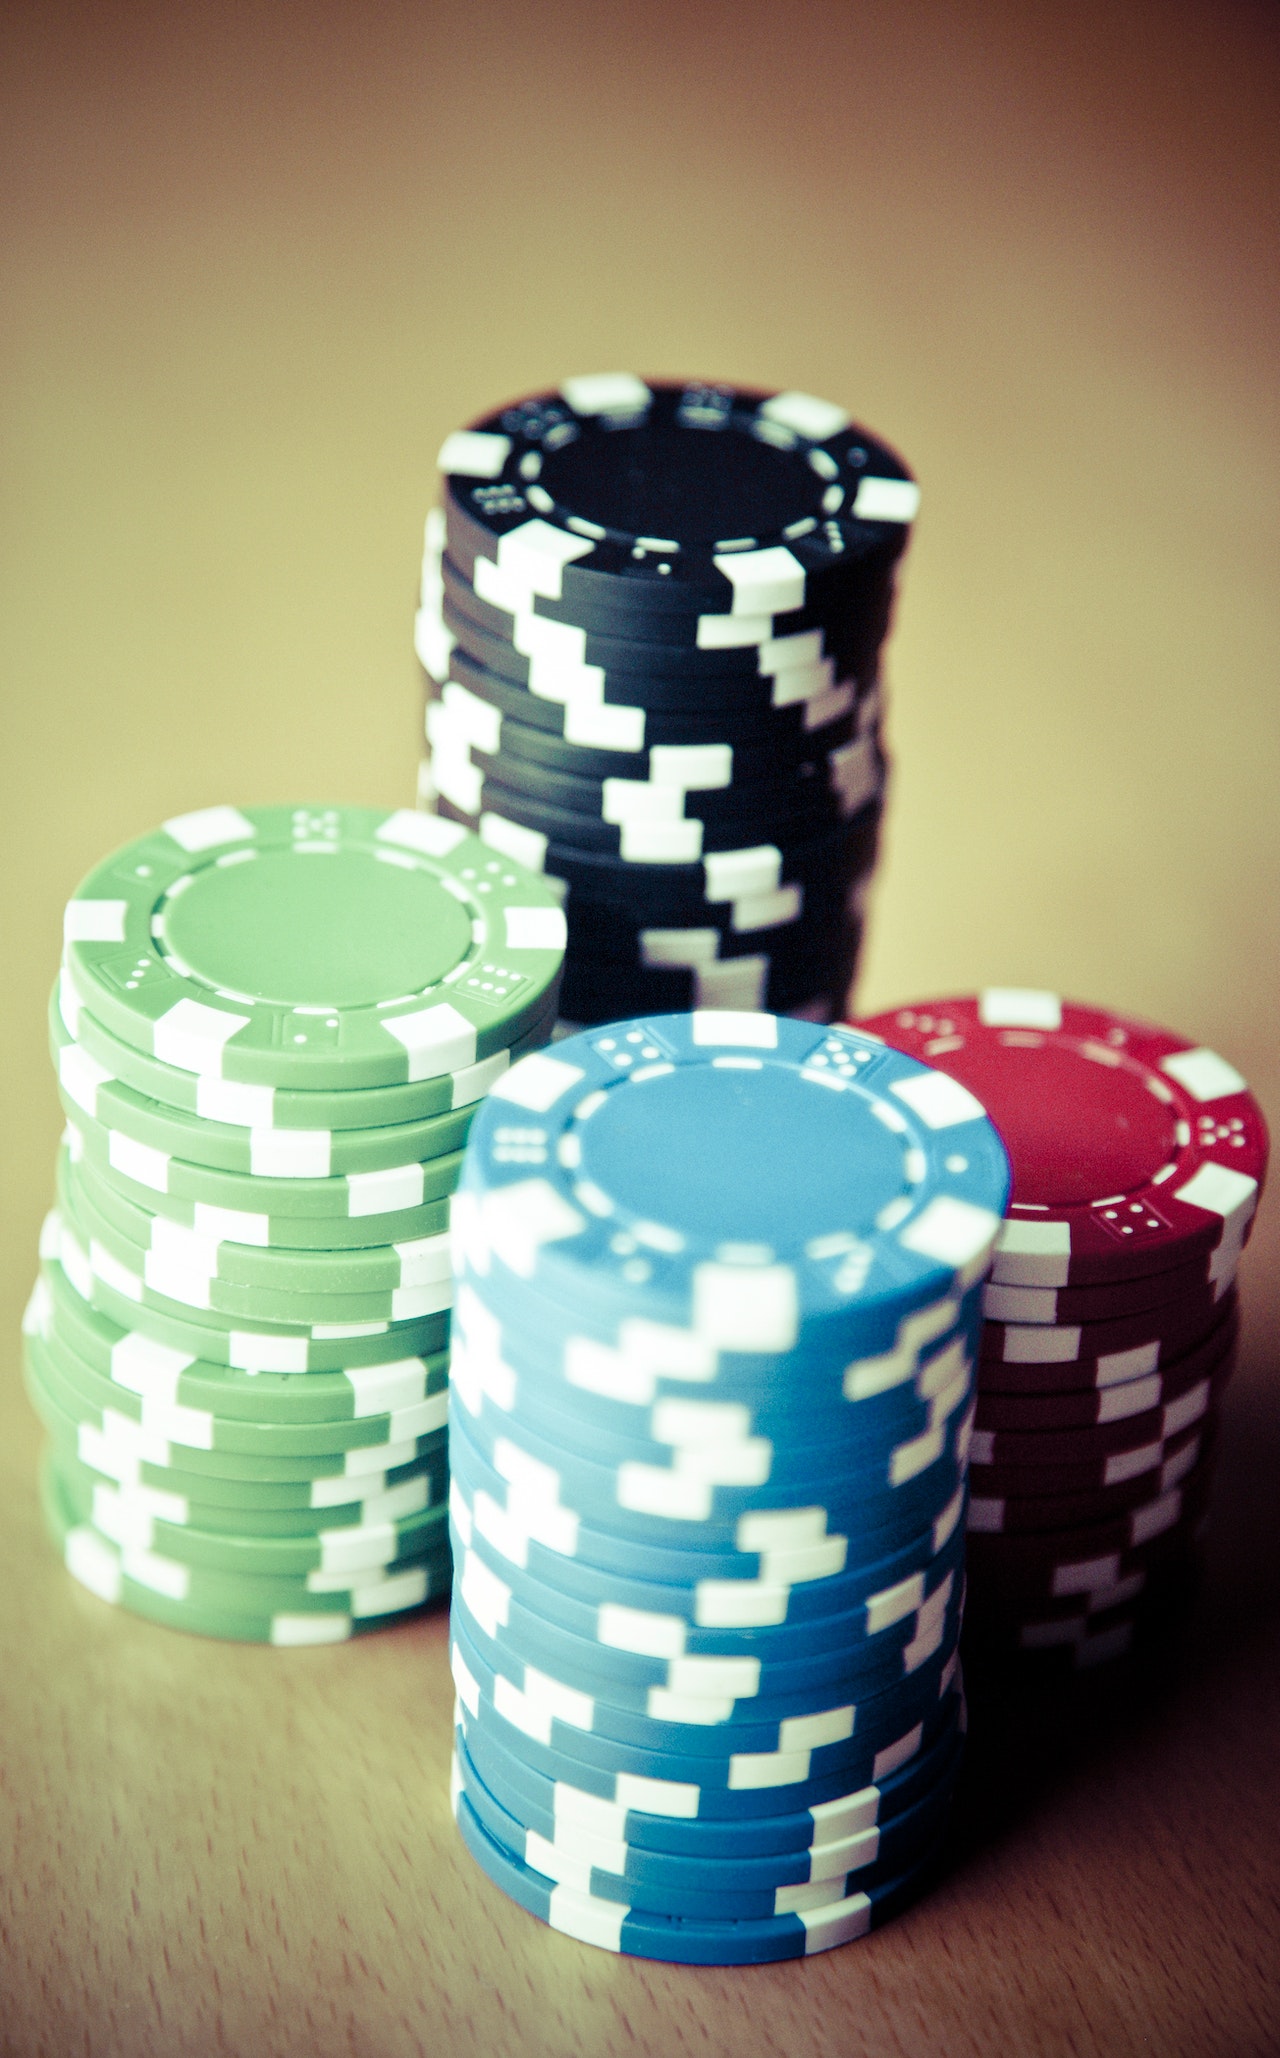 Towers of poker chips